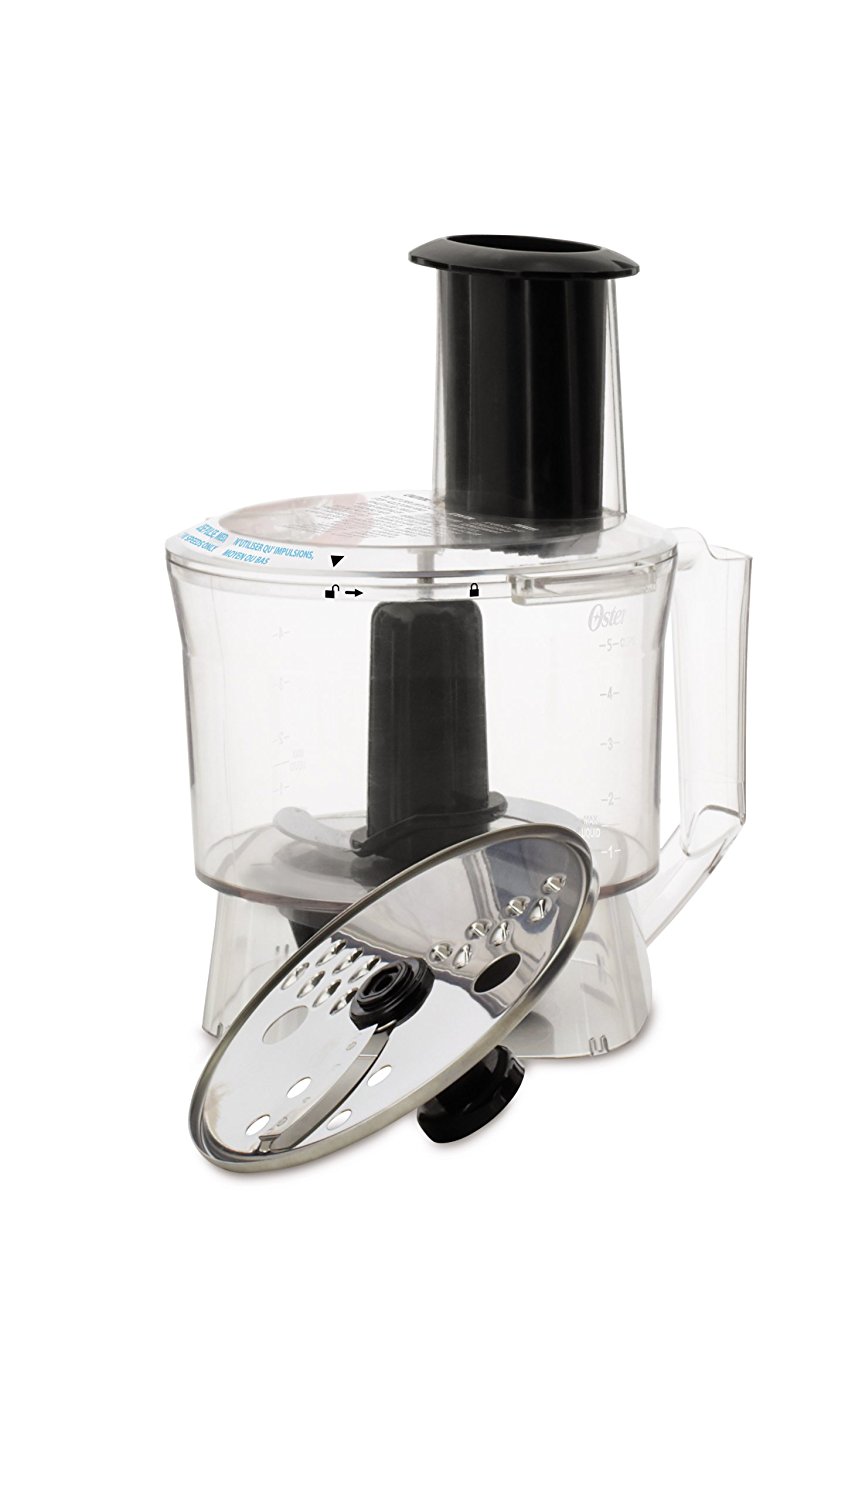 Oster Versa 1100 Series Performance Red Variable Speed Blender - image 2 of 7